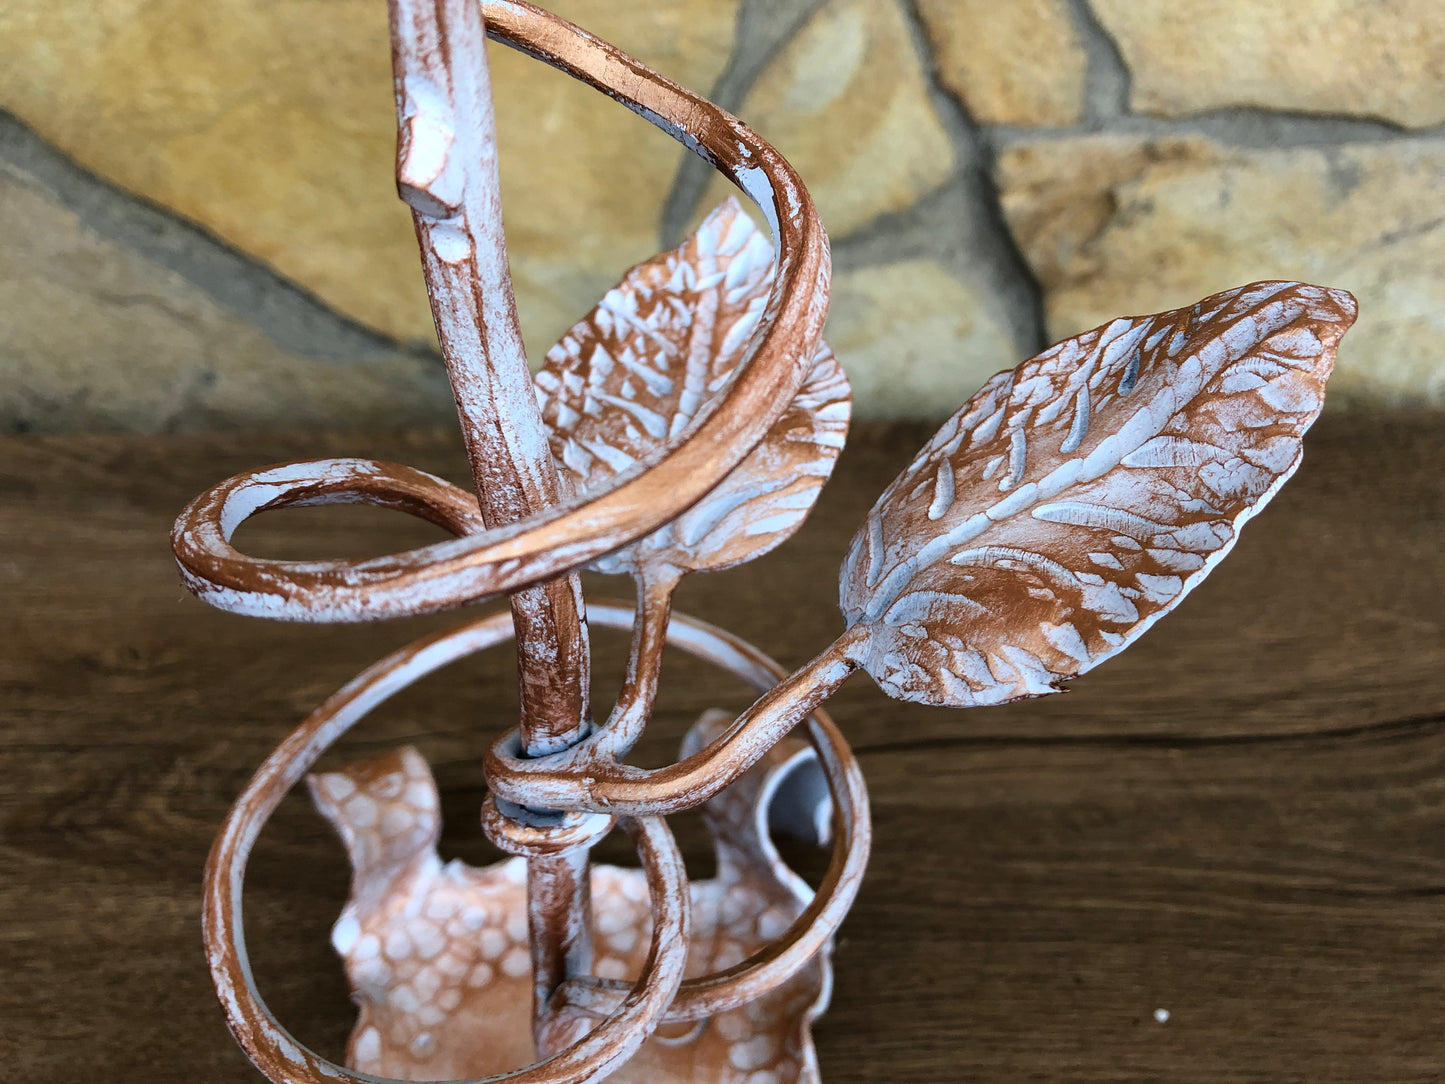 Metal rose, wedding anniversary, anniversary gift, wedding gift, Mother's day gift, Valentine's day gift,metal gift for her,hand forged rose